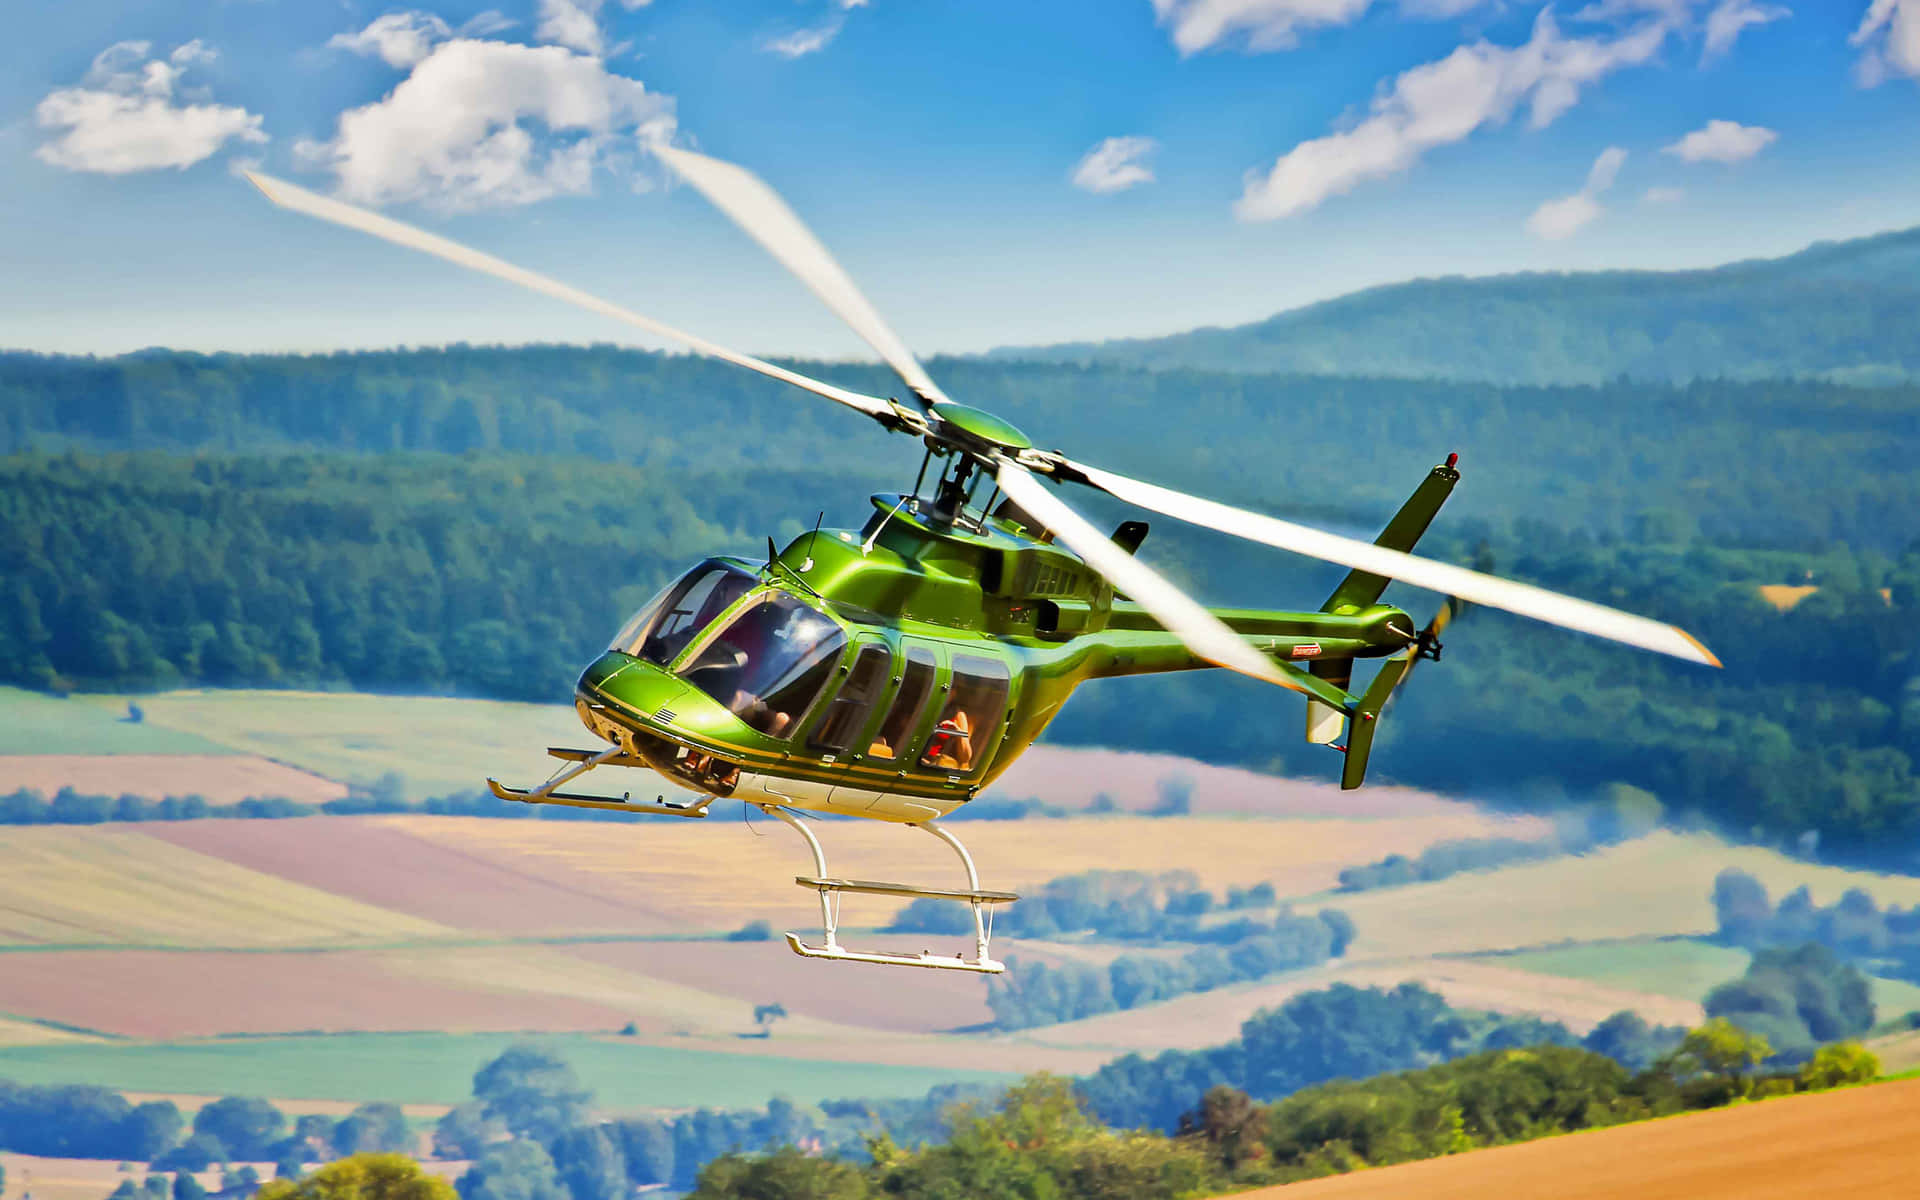 World-class 4K helicopters delivering luxury experiences